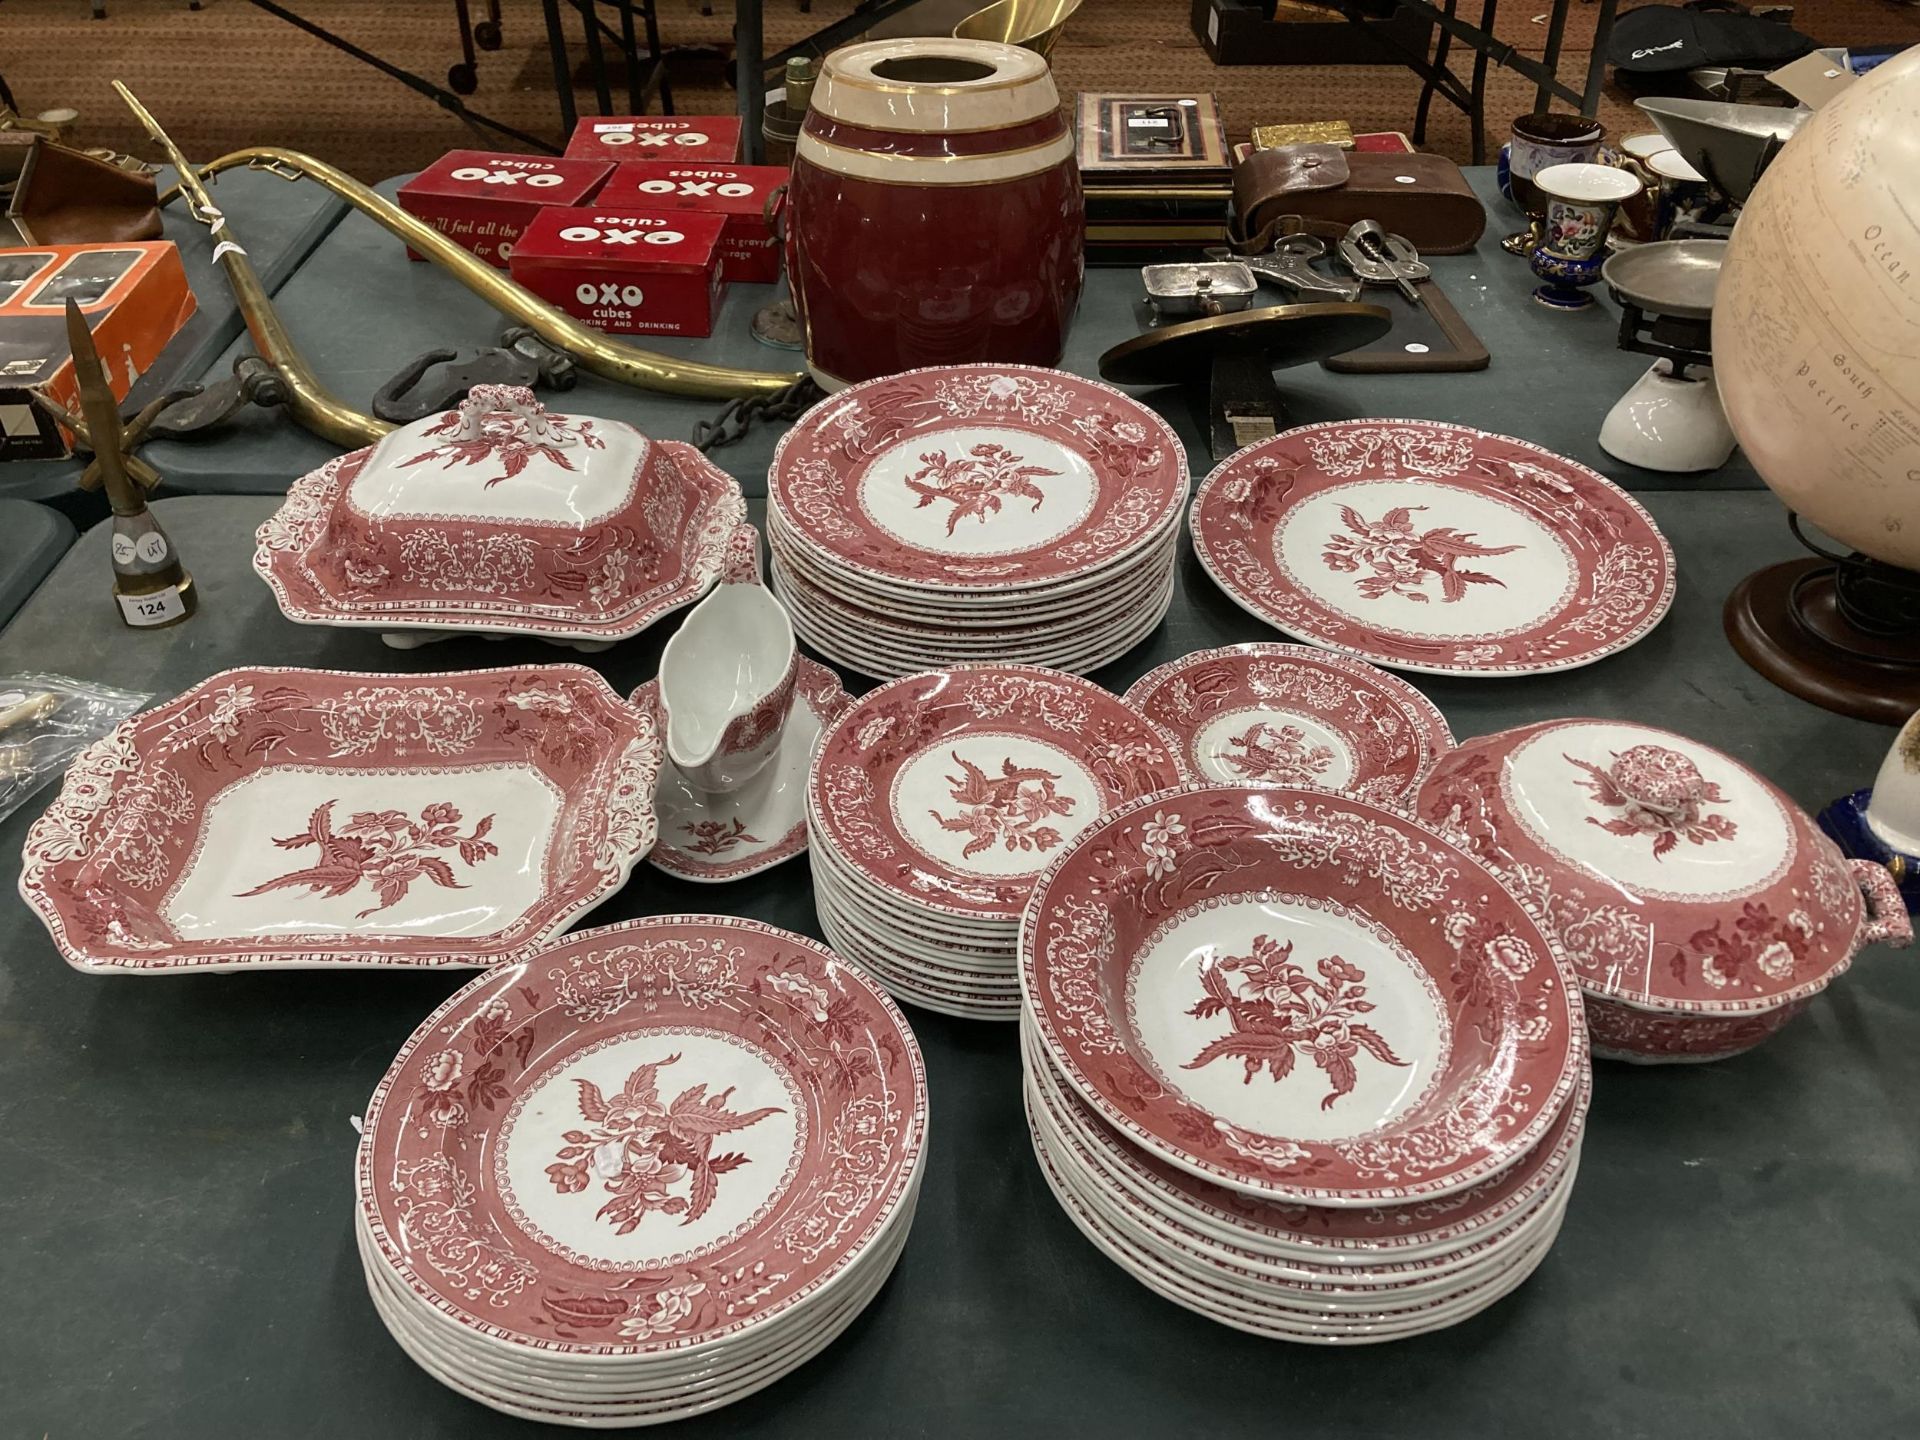 A LARGE QUANTITY OF VINTAGE SPODE 'PINK CAMILLA' DINNERWARE TO INCLUDE VARIOUS SIZES OF PLATES,